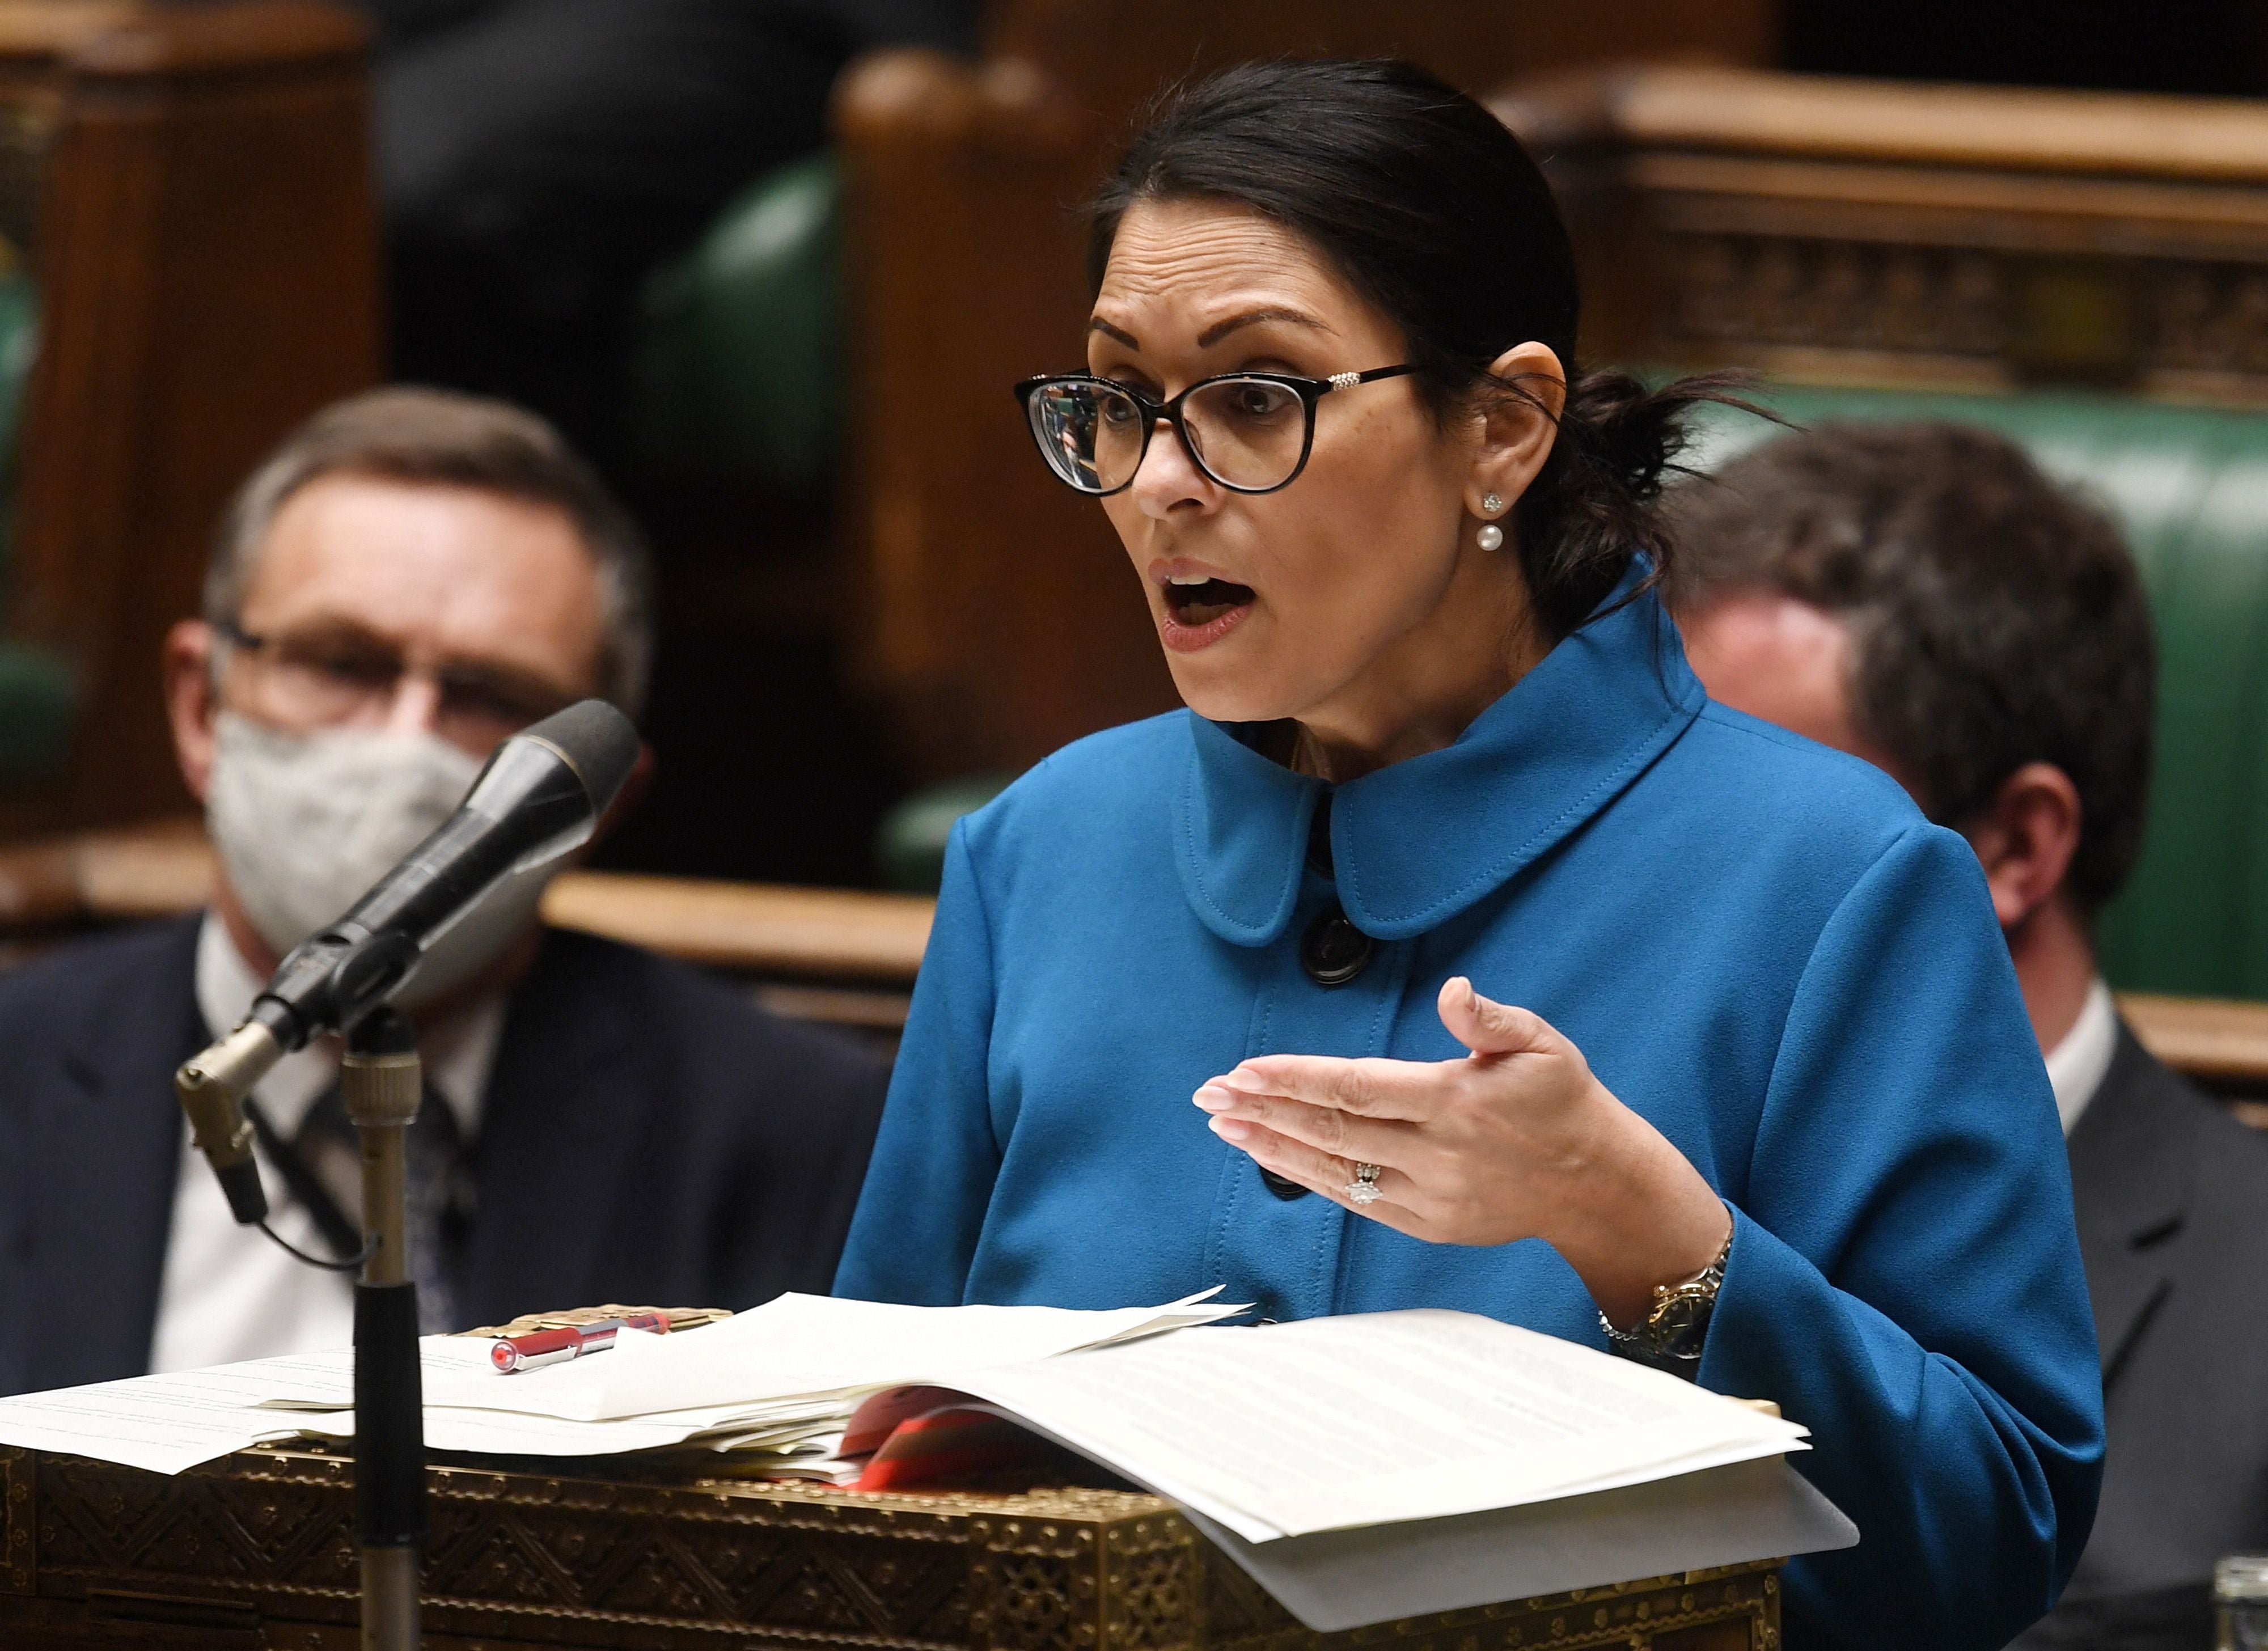 Home Secretary Priti Patel making a Statement on the 'Small boats incident in the Channel', in the House of Commons in London on November 25, 2021.